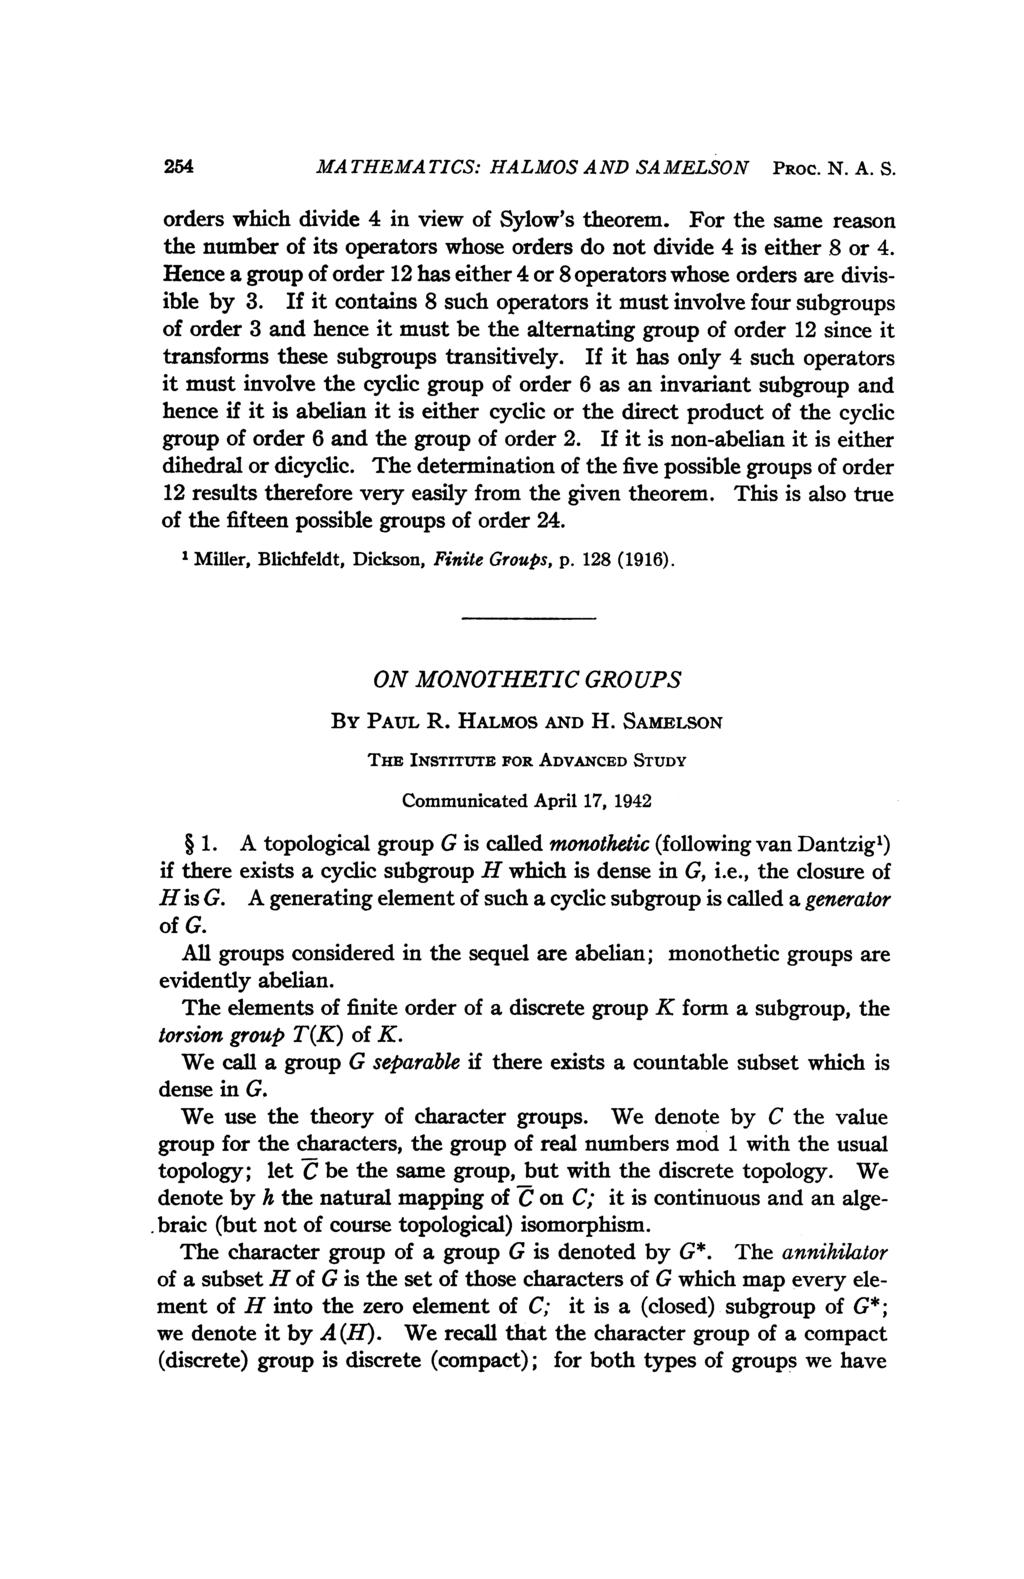 254 MATHEMATICS: HALMOSAND SAMELSON PROC. N. A. S. orders which divide 4 in view of Sylow's theorem. For the same reason the number of its operators whose orders do not divide 4 is either 8 or 4.